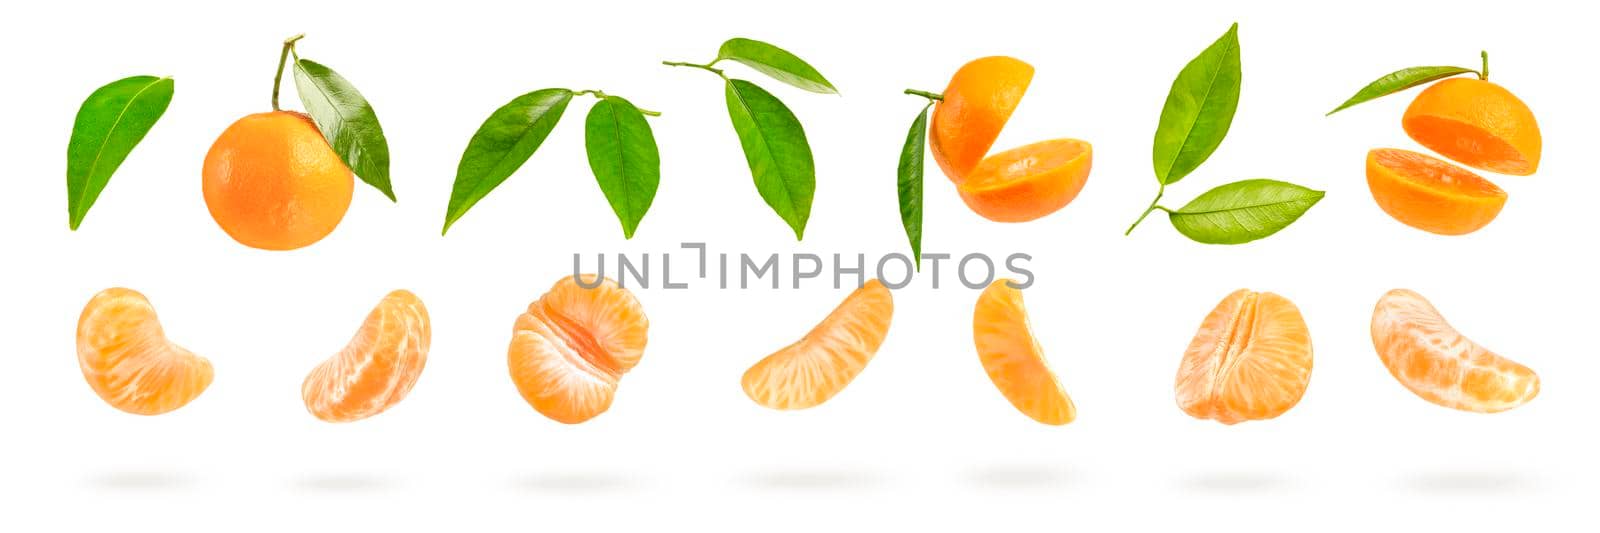 Big set of tangerine parts, different tangerine segments isolated on white background. Leaves and pieces of tangerine fall, casting a shadow.